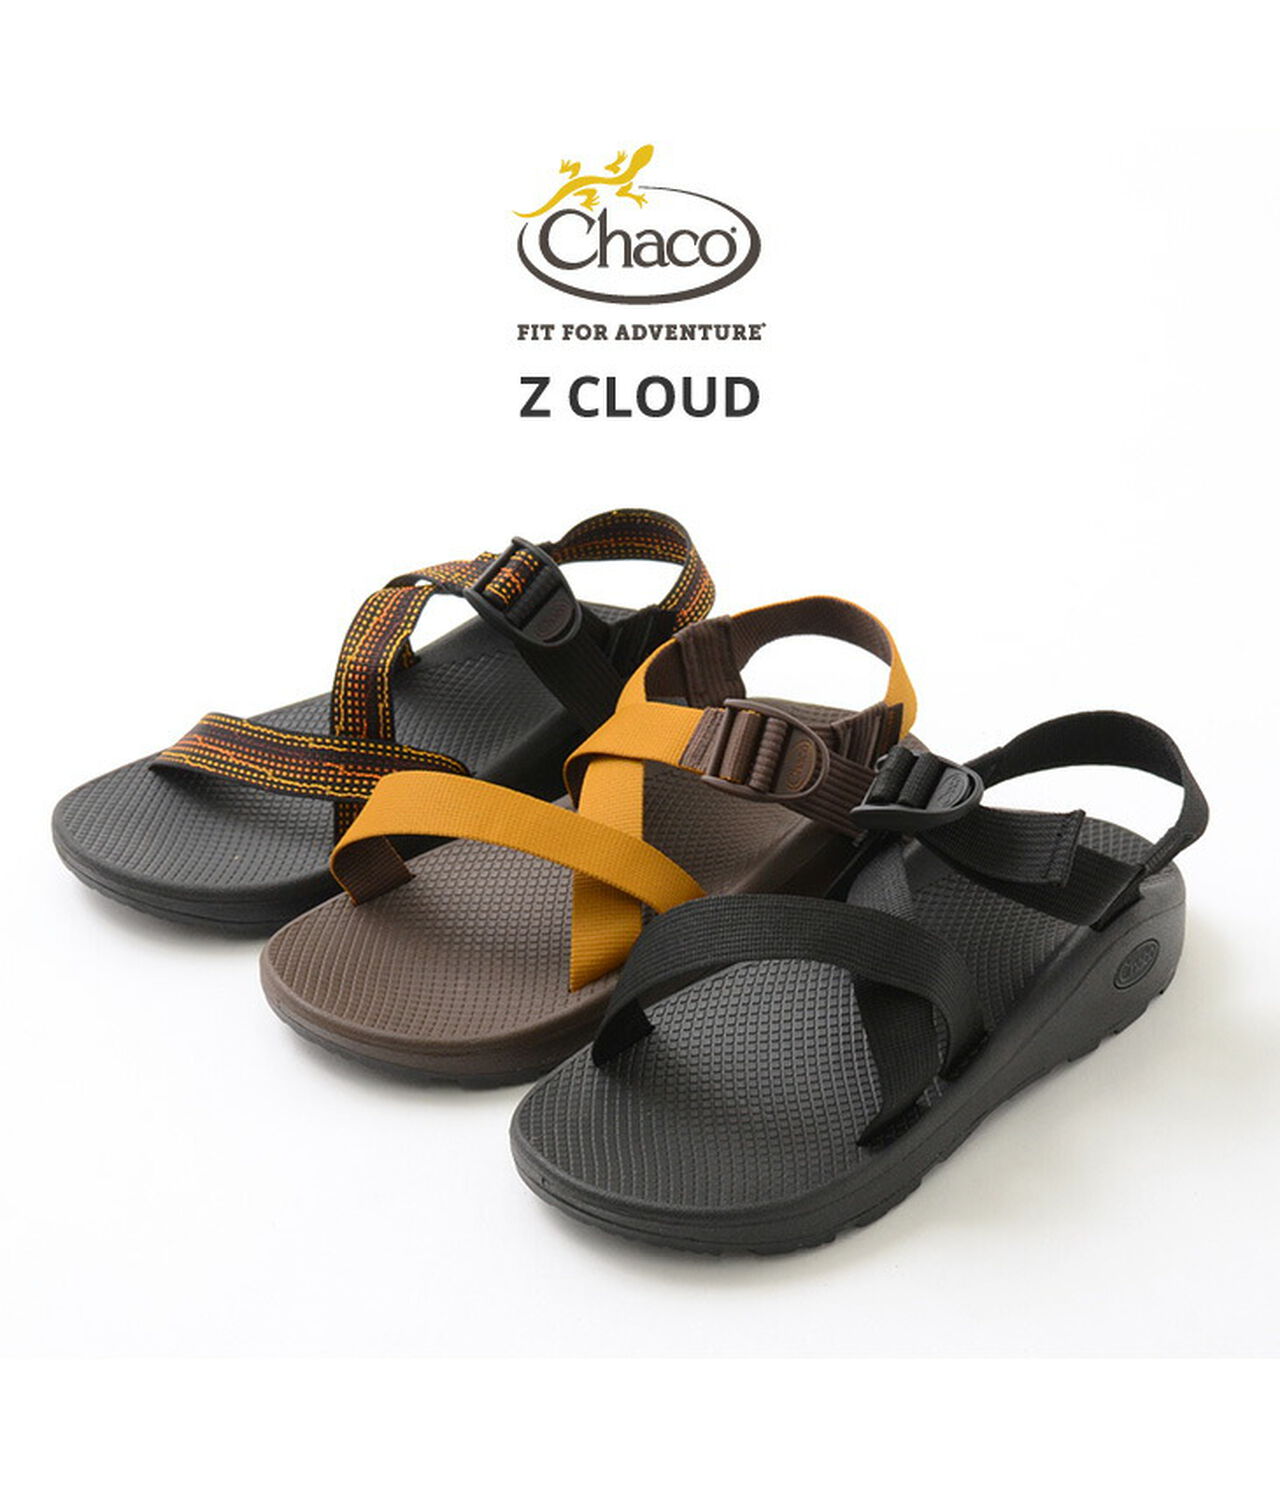 New Mens Chaco Classic Leather Black Flip Flops Sandals Size 13 M NWT